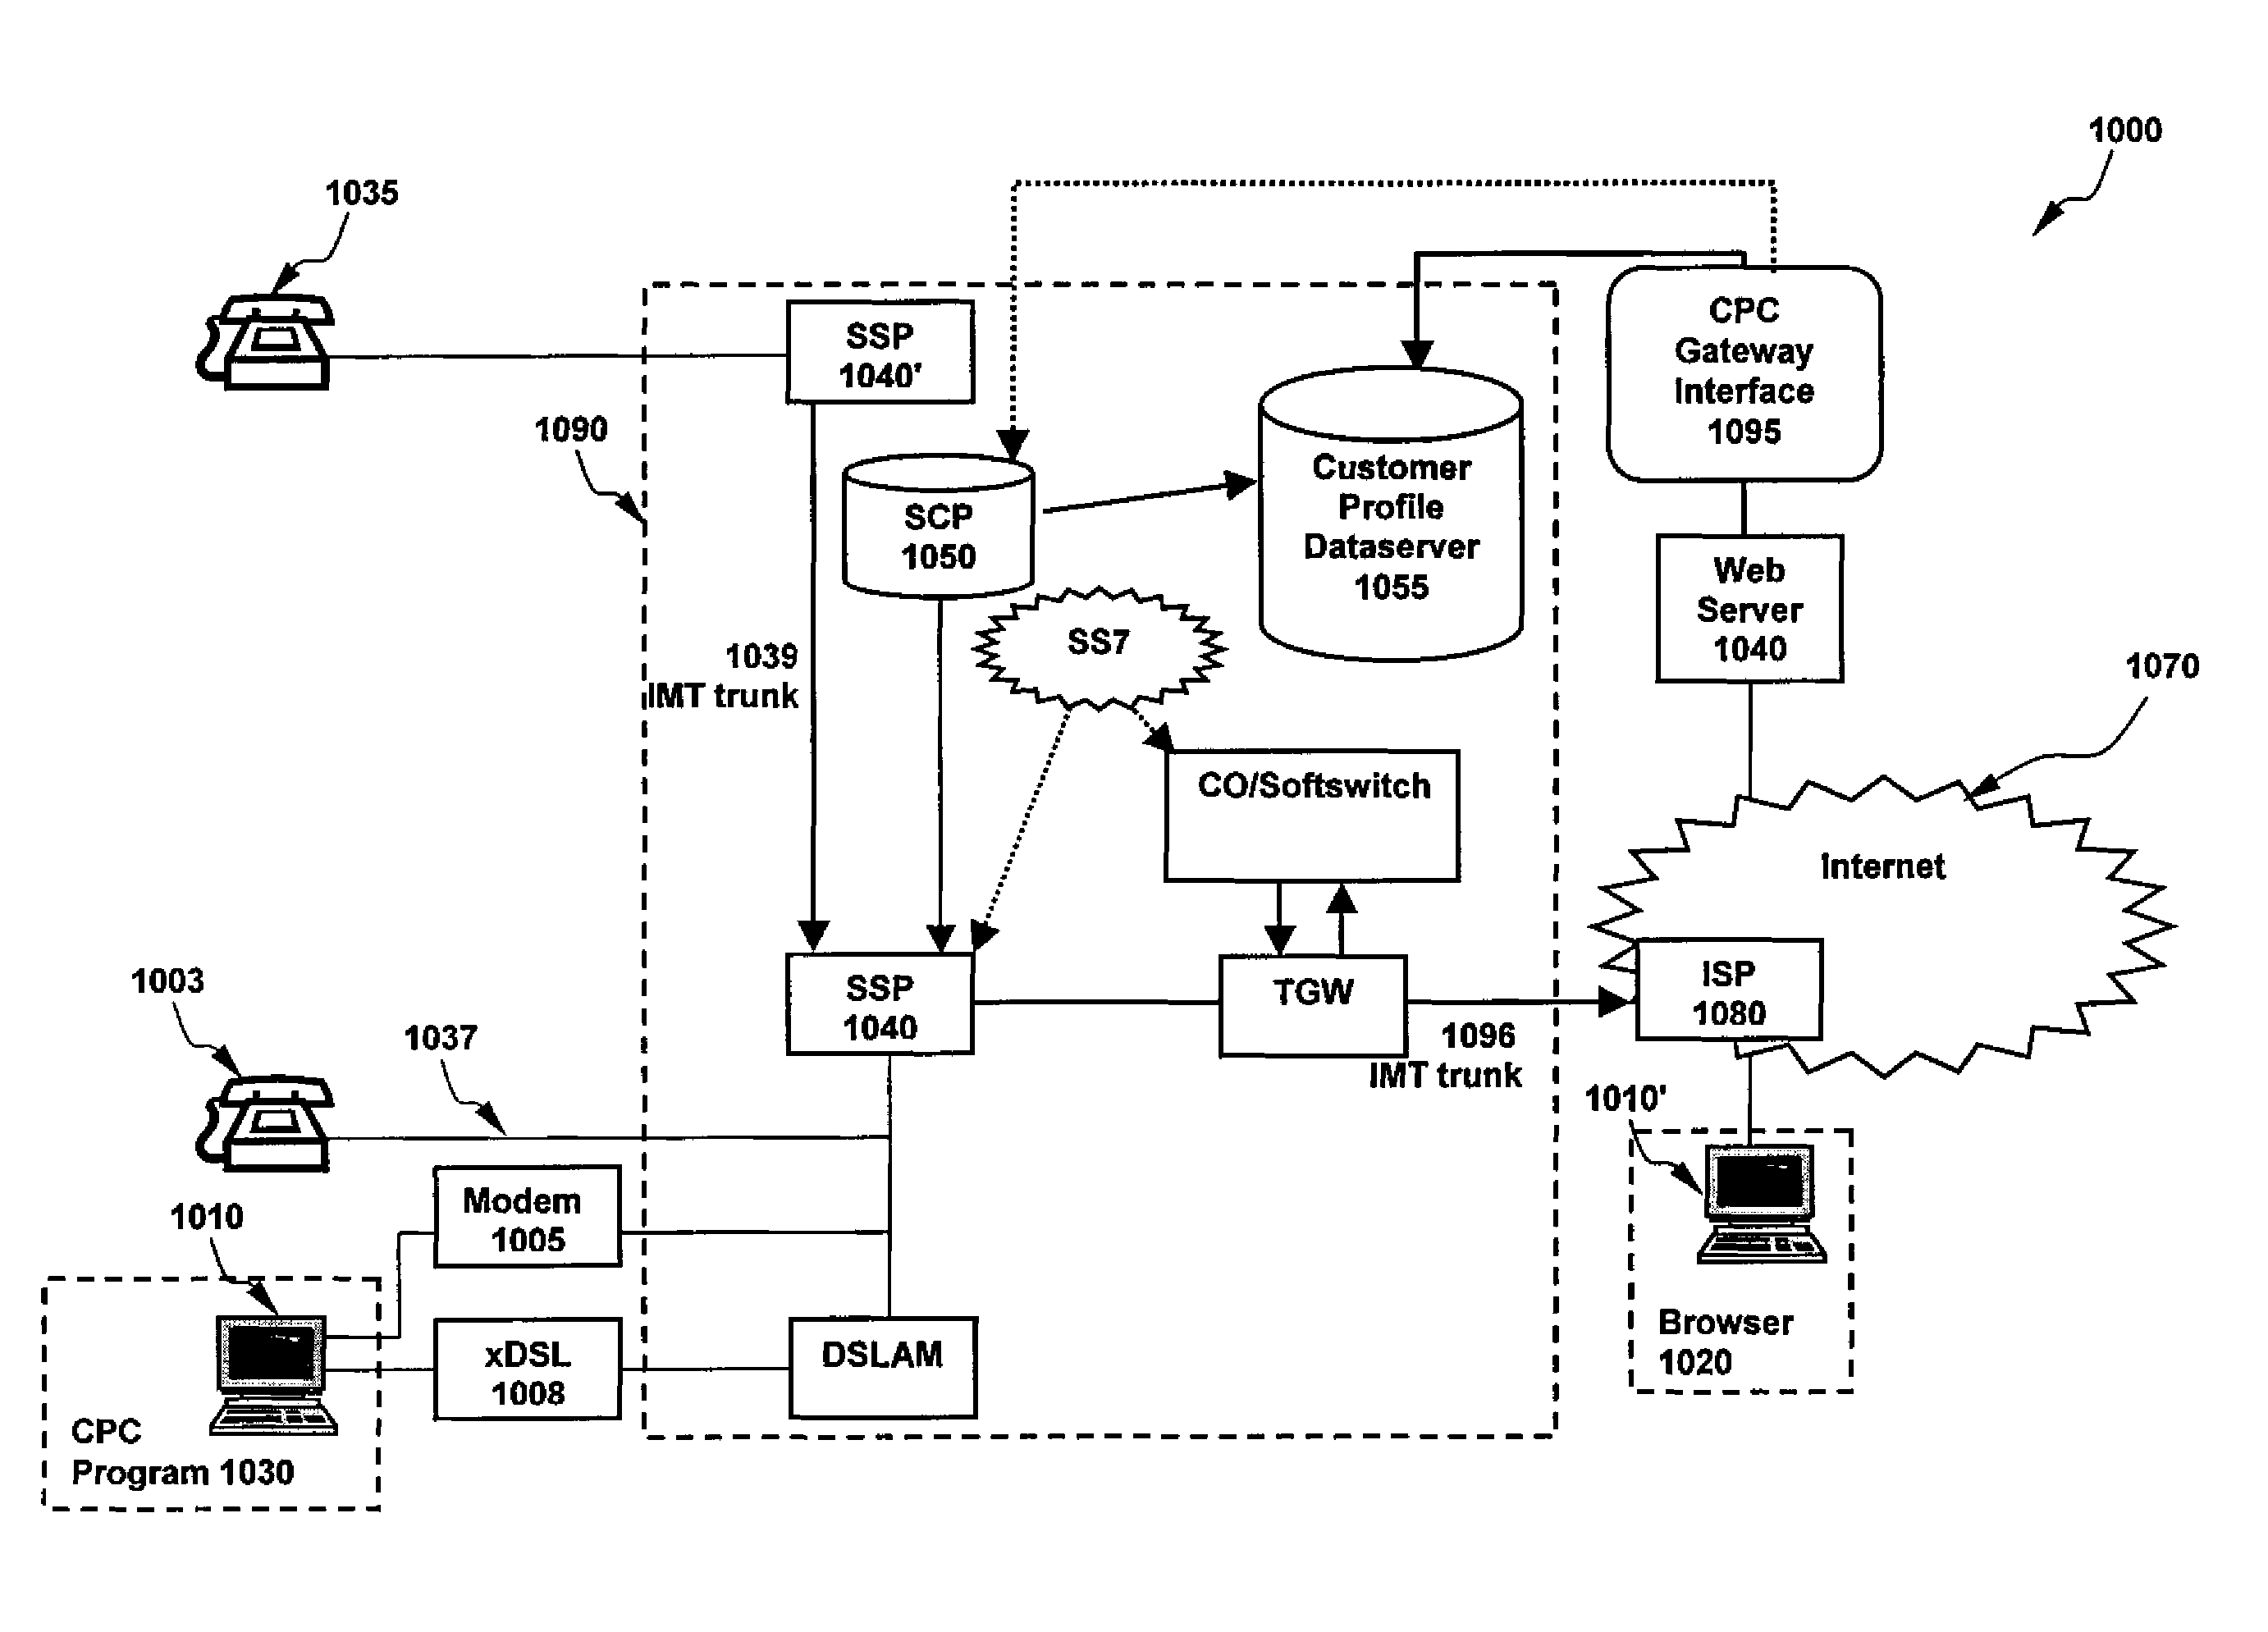 System and Method for Monitoring and Handling Telecommunication Activity Via A Computer Network